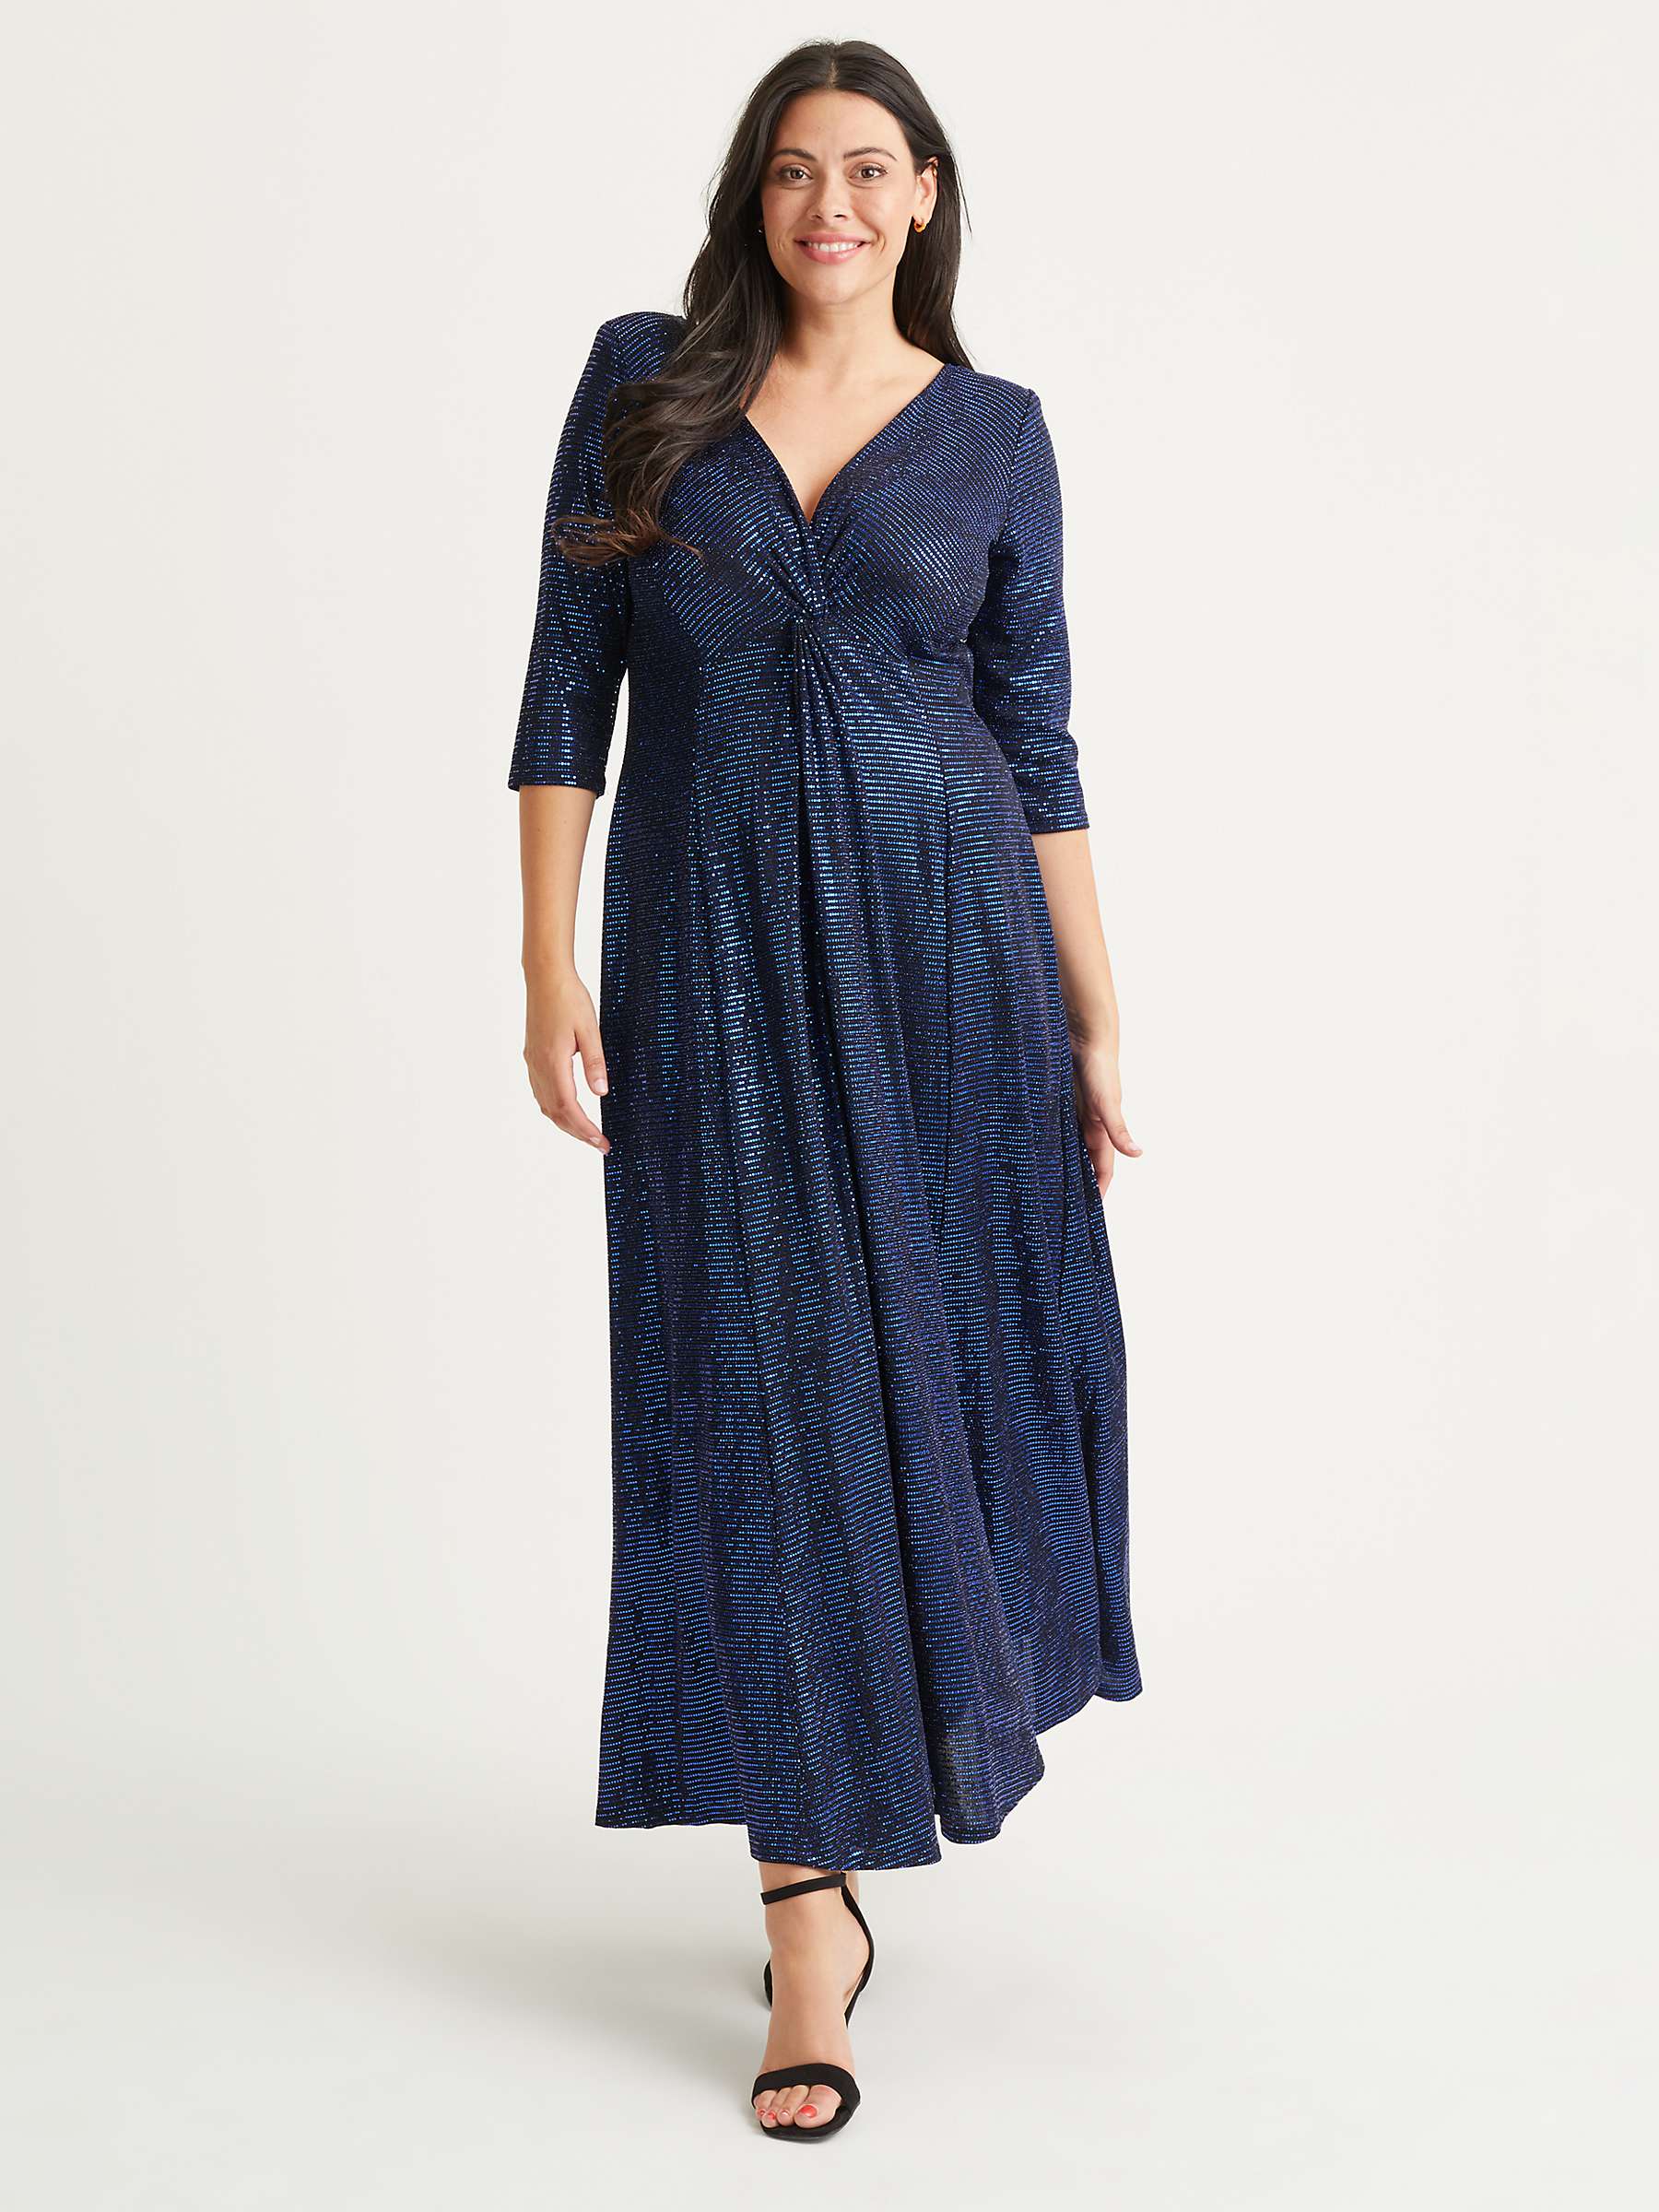 Buy Scarlett & Jo Knot Front Sequin Gown, Blue Online at johnlewis.com